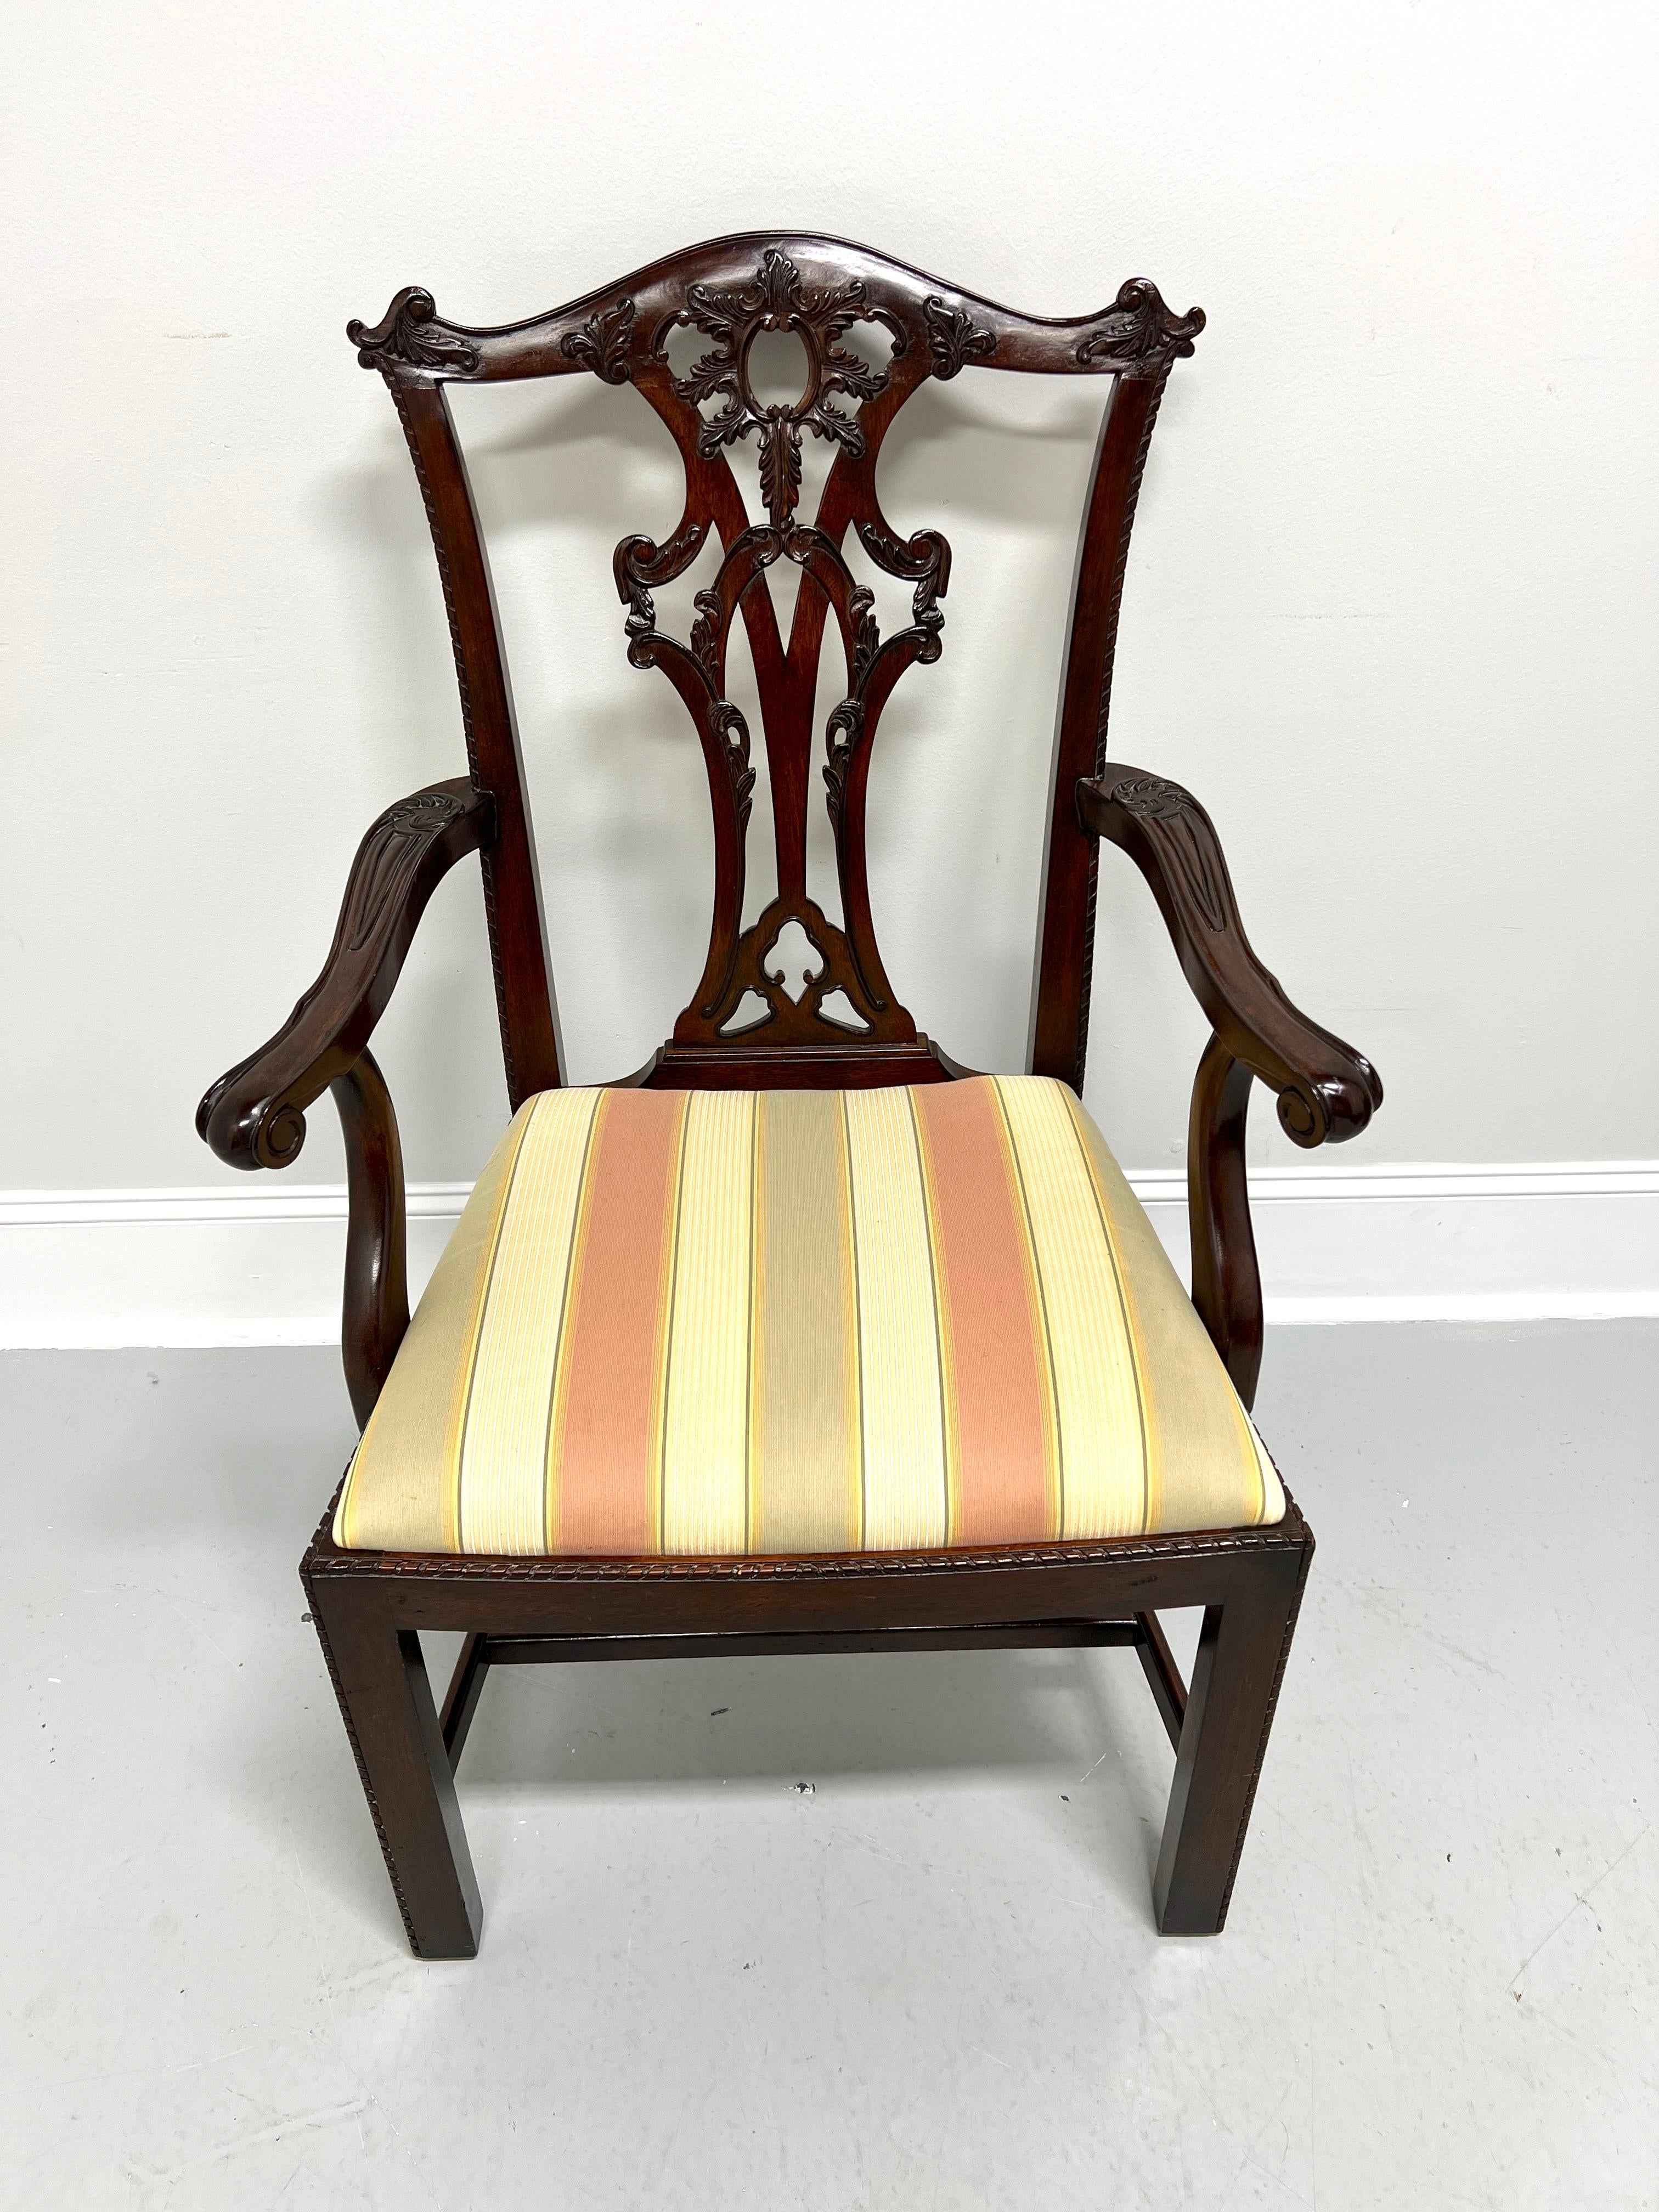 A Chippendale style armchair by Maitland Smith. Solid mahogany with decoratively carved crest rail & backrest, curved carved arms with paw-like hand rests, decorative beading details to stiles, apron & legs, straight front legs and stretchers. Seat